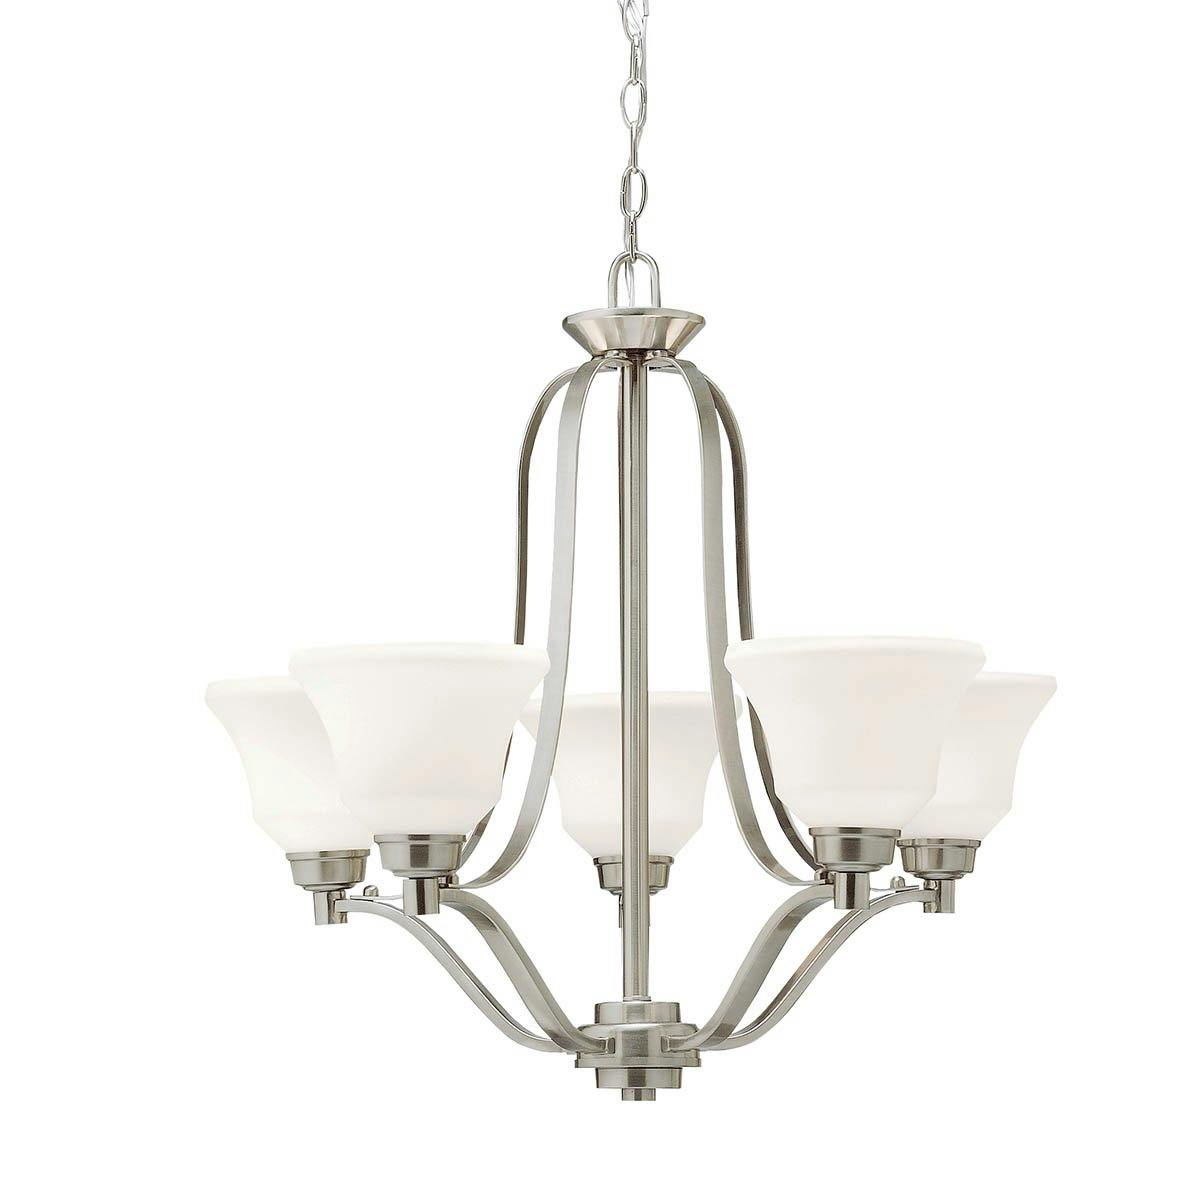 Langford 24.5" 5 Light Chandelier Nickel on a white background